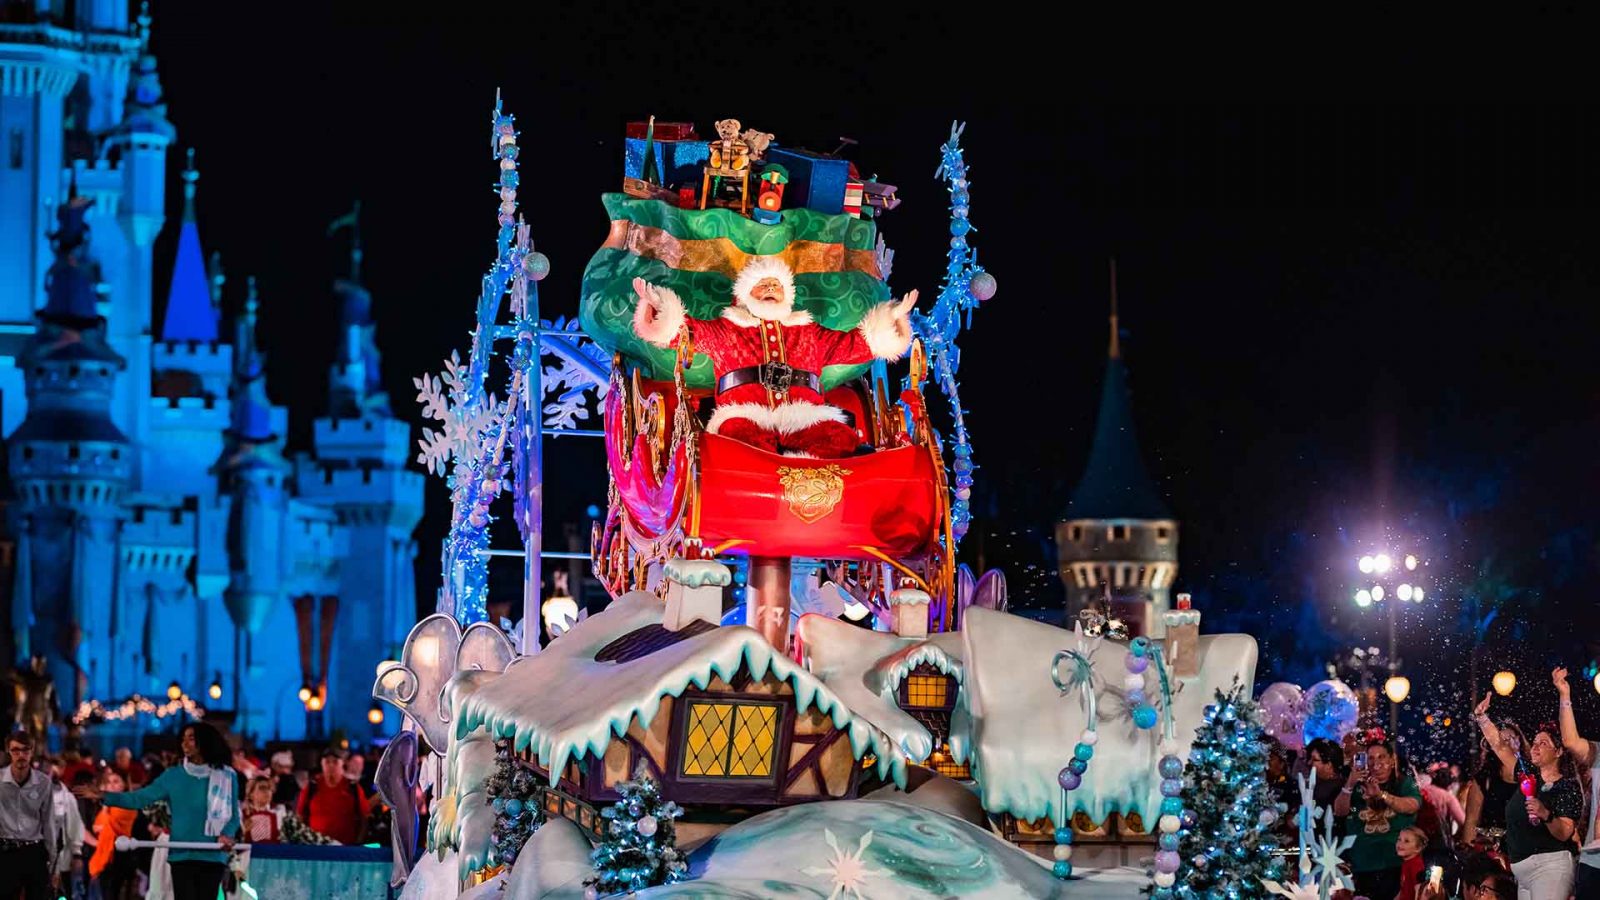 Santa Clause on his sleigh float in Mickey's Once Upon A Christmastime Parade in front of Cinderella Castle